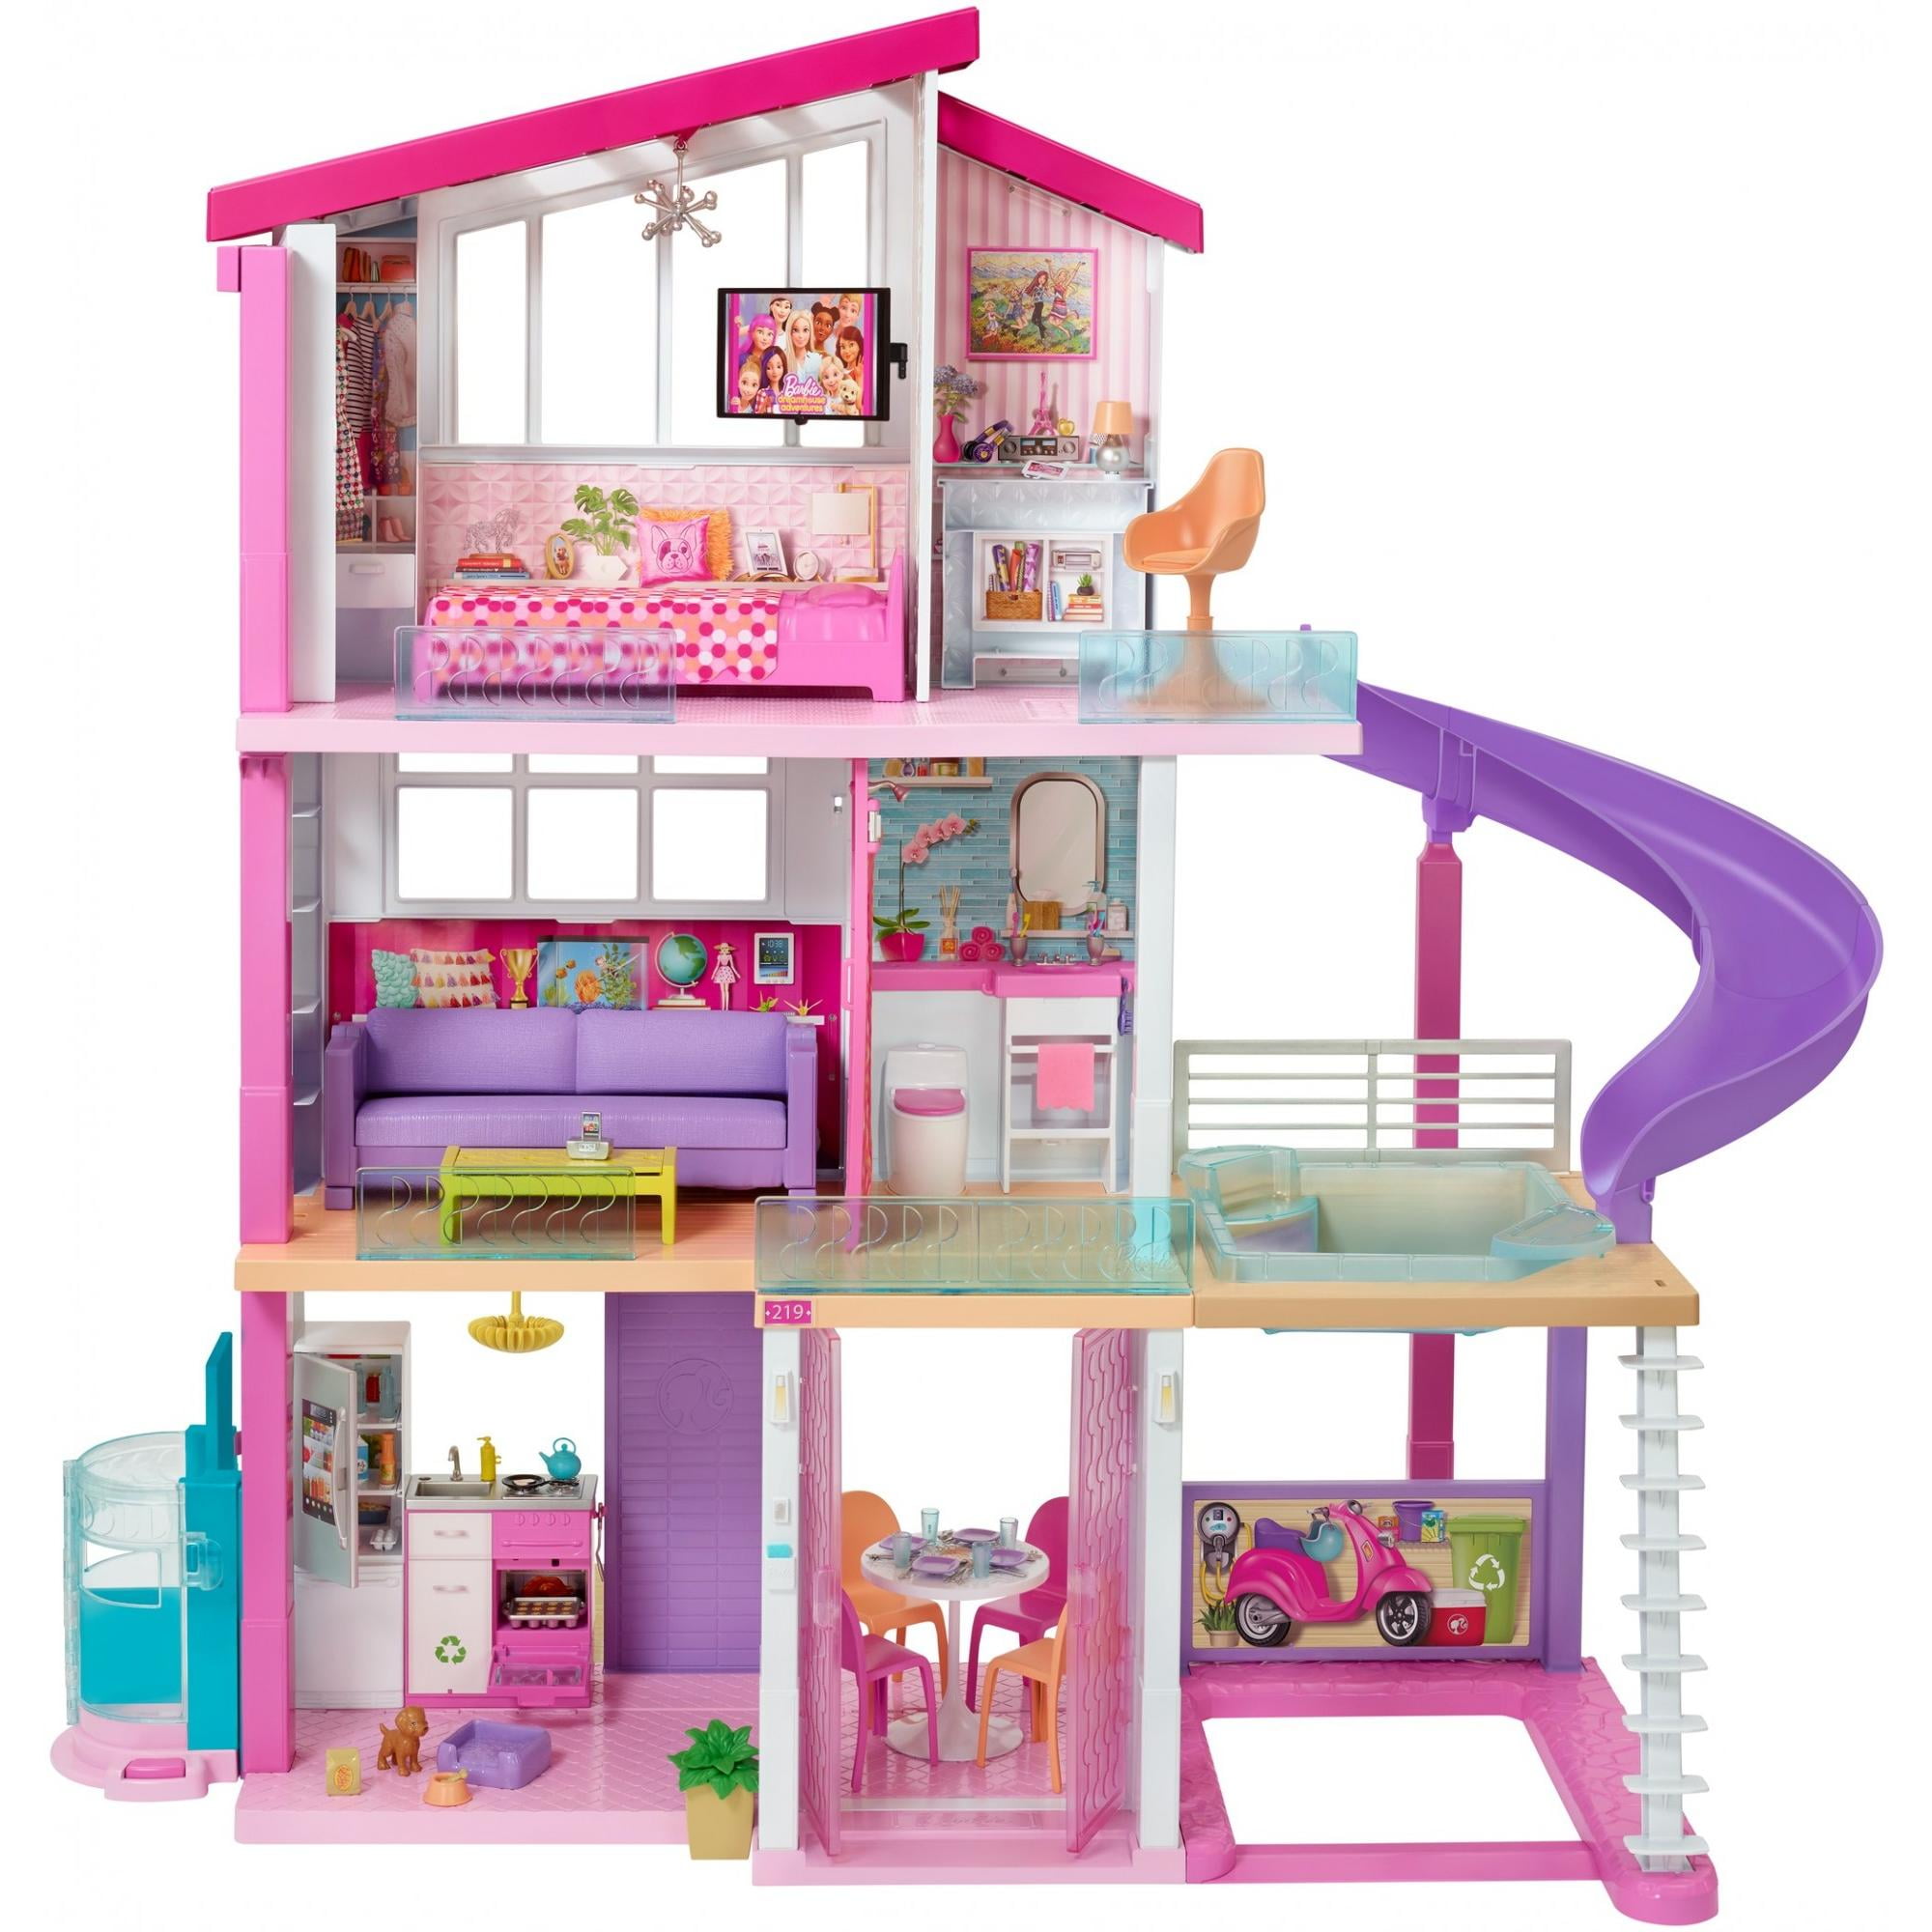 Barbie Dreamhouse 46.5 inch with Elevator, Pool, Slide and 70 Including Furniture and Household Items, Gift for 3 to 7 Year Olds, assembly required - Walmart.com